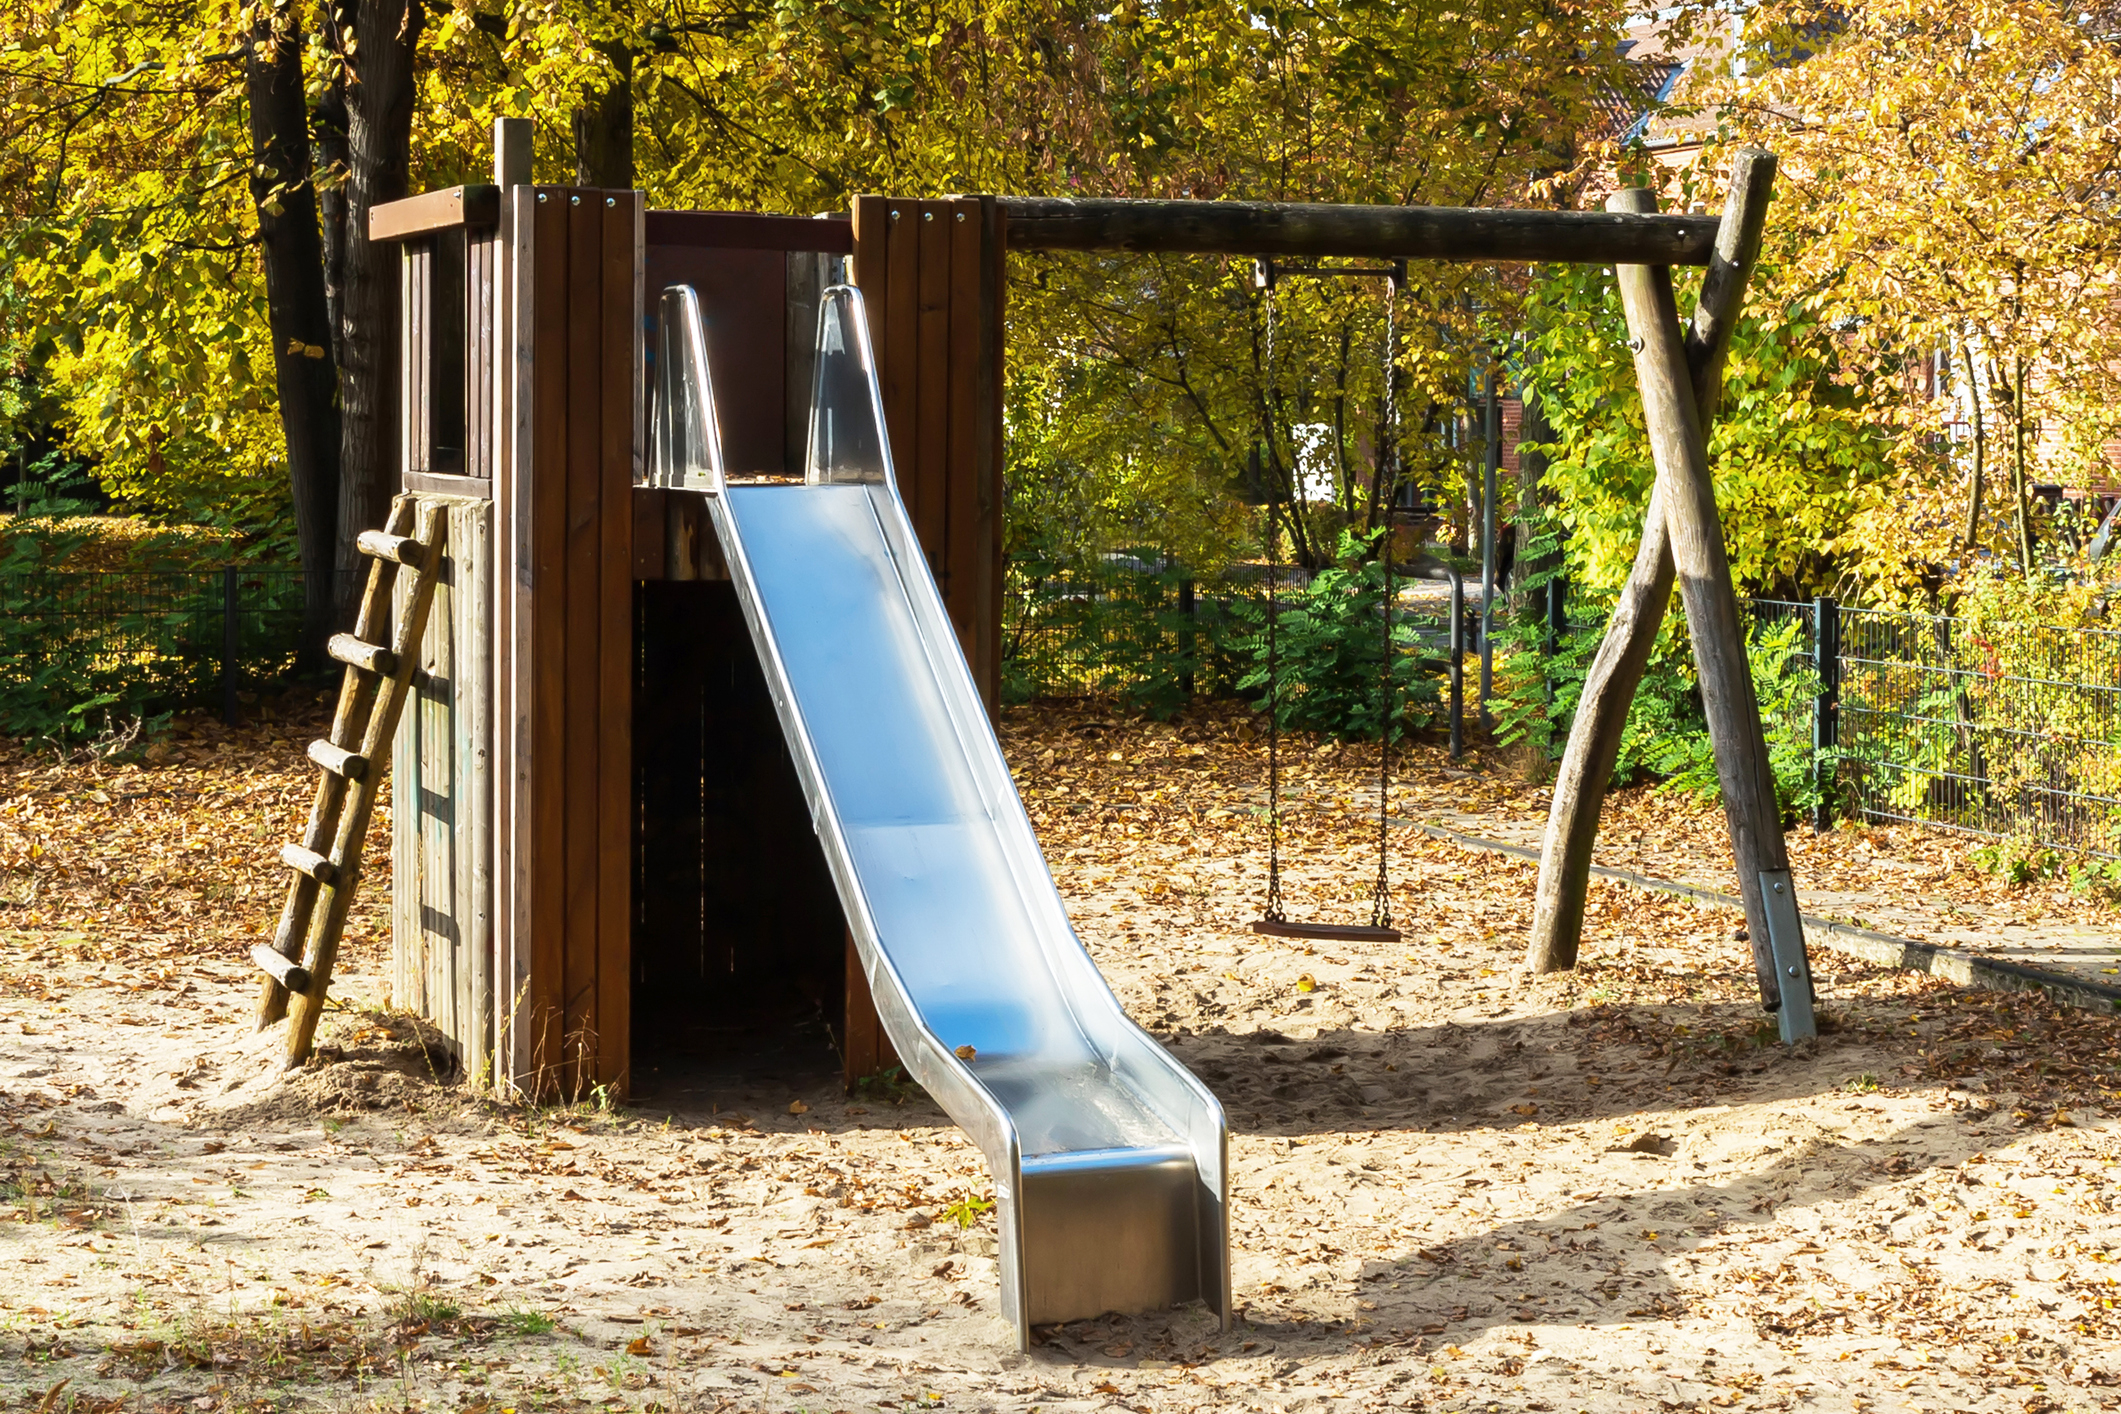 Playground with a slide, swing set, and climbing ladder amidst trees and fallen leaves